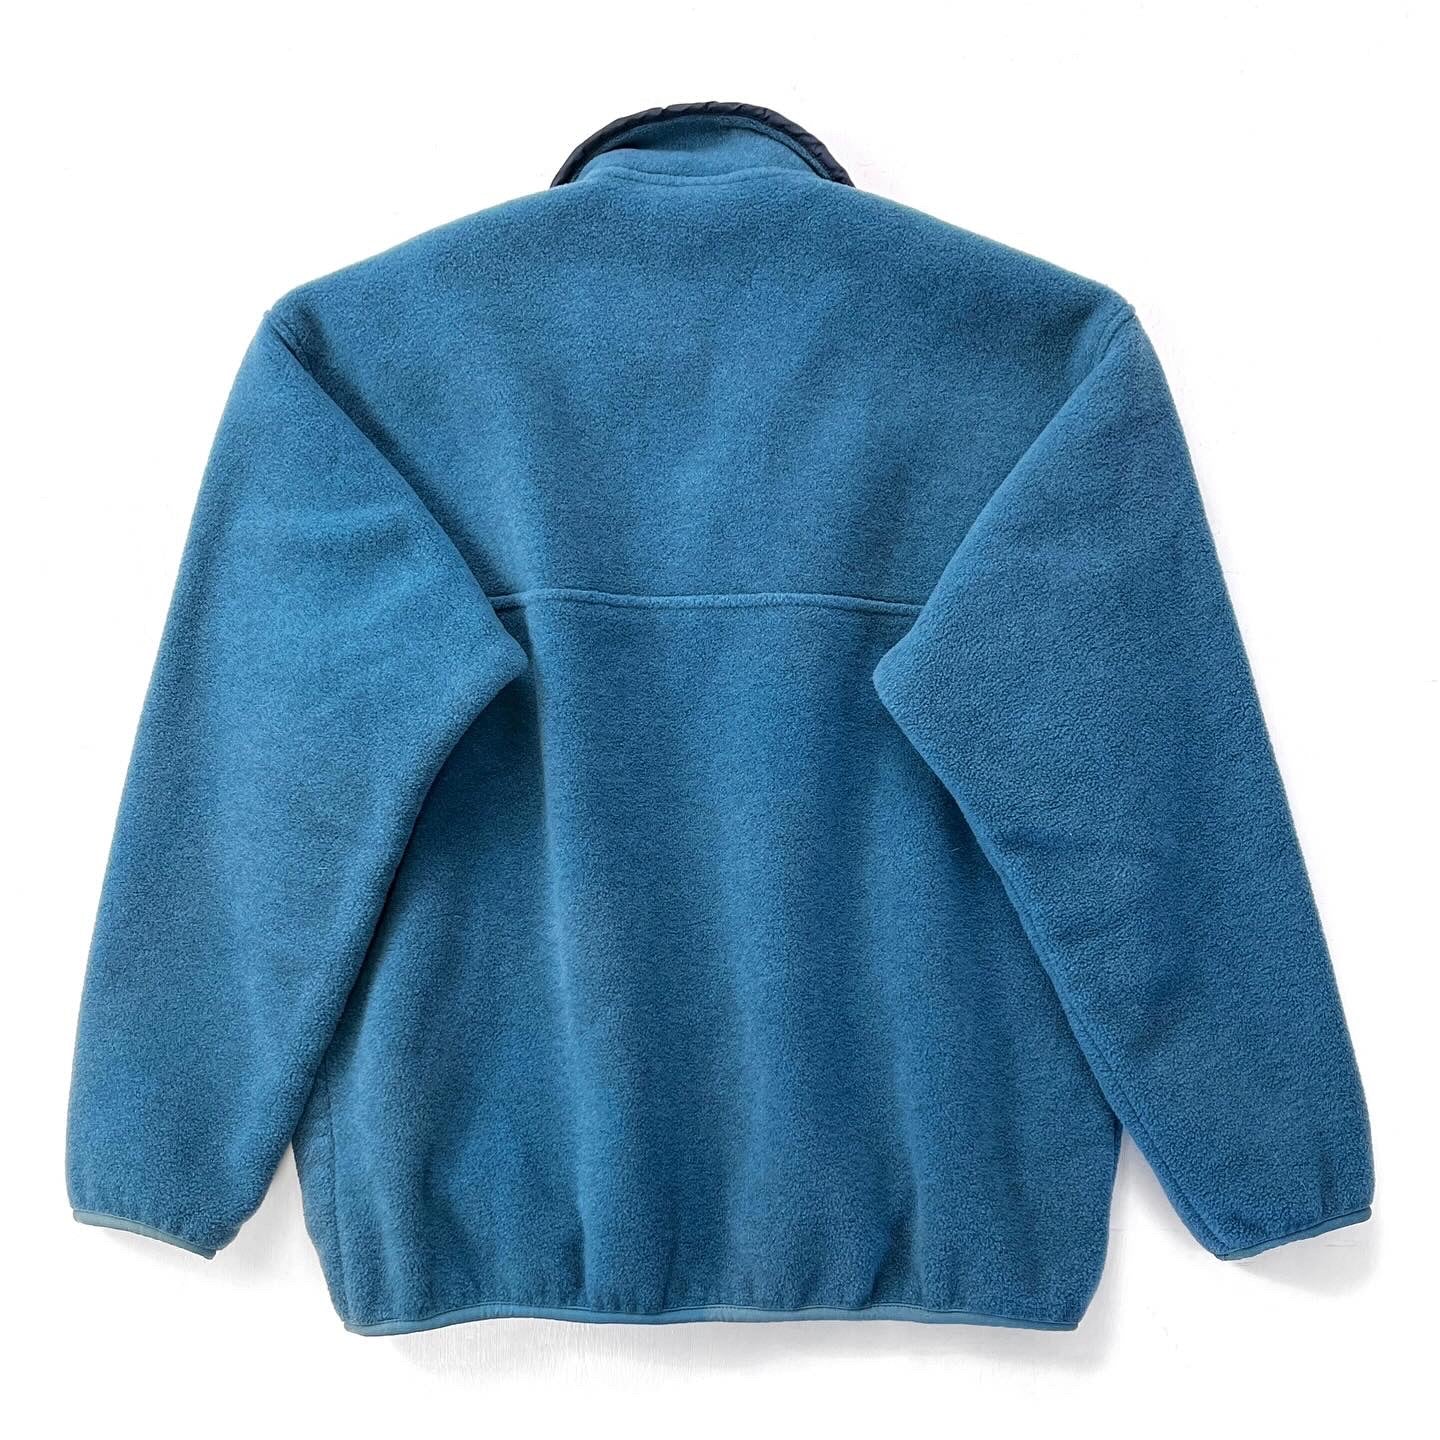 2001 Patagonia Made In The U.S.A. Synchilla Snap-T, Atlantic Blue (L)